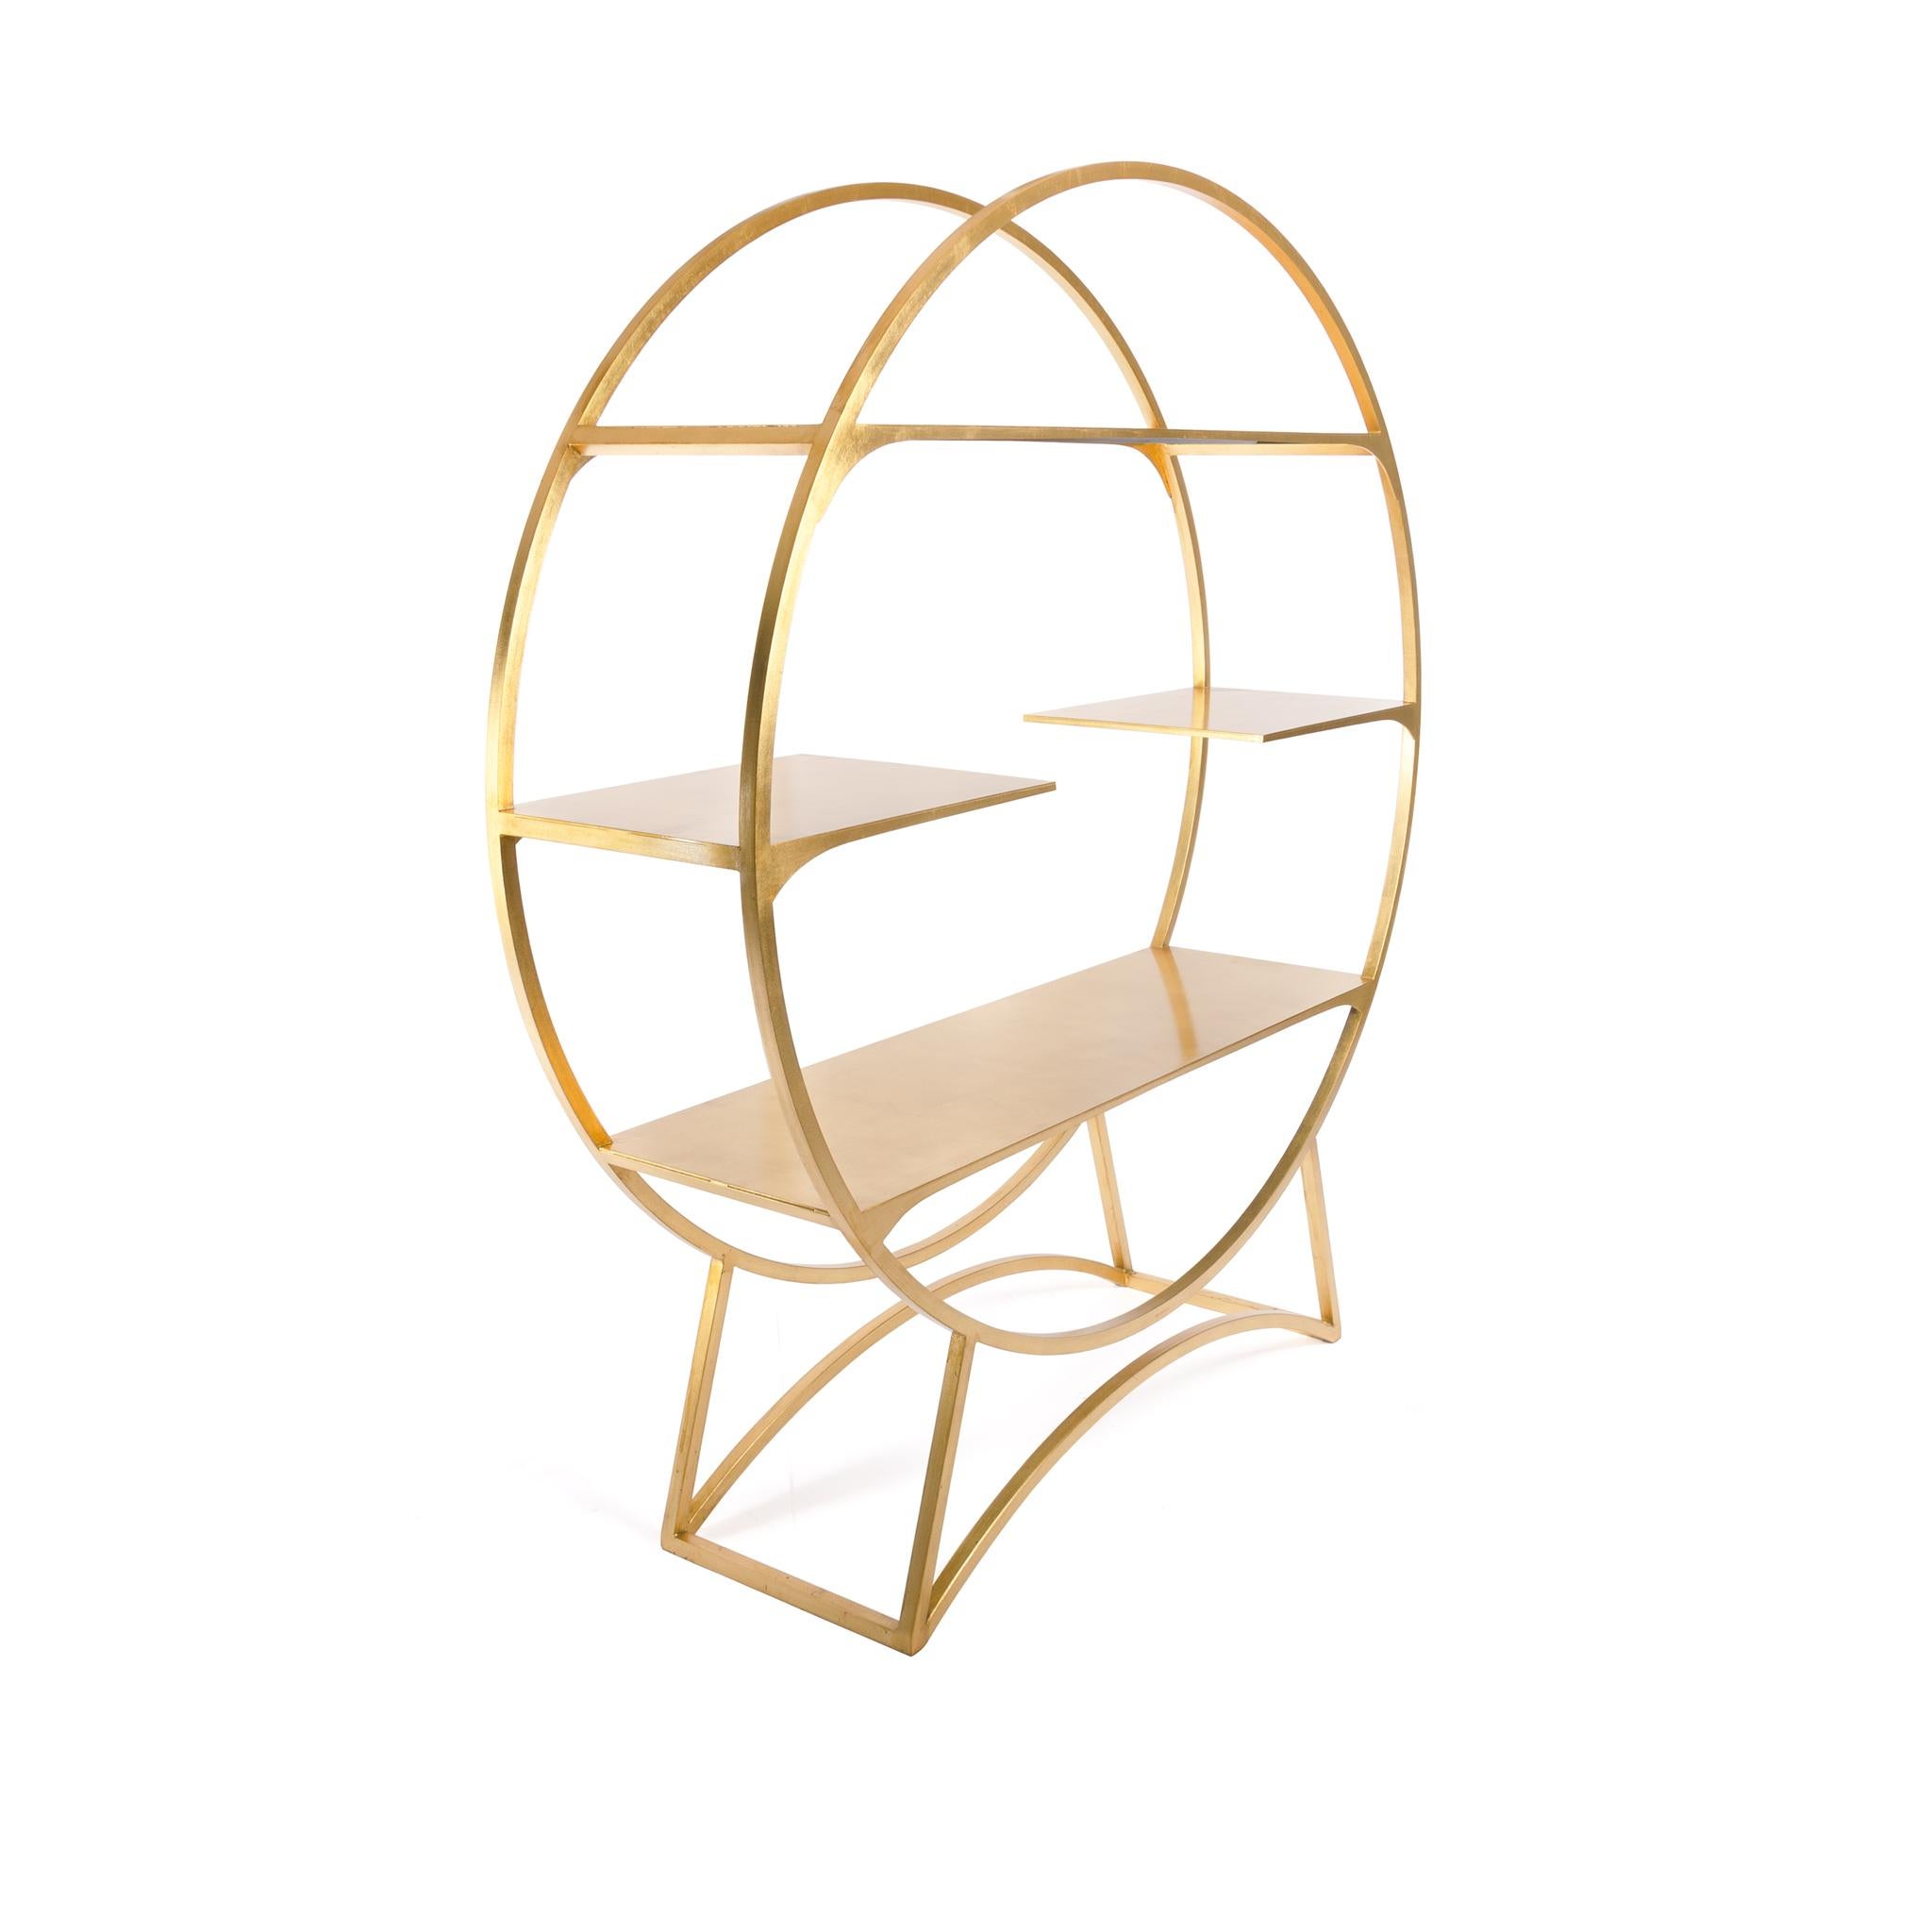 With its elegant lines and bright golden leaf hand-finish, the oversized orb is an eye-catching display piece perfect for showcasing personal treasures or retail wares. It looks as lovely against a wall as it does in the center of a room as a